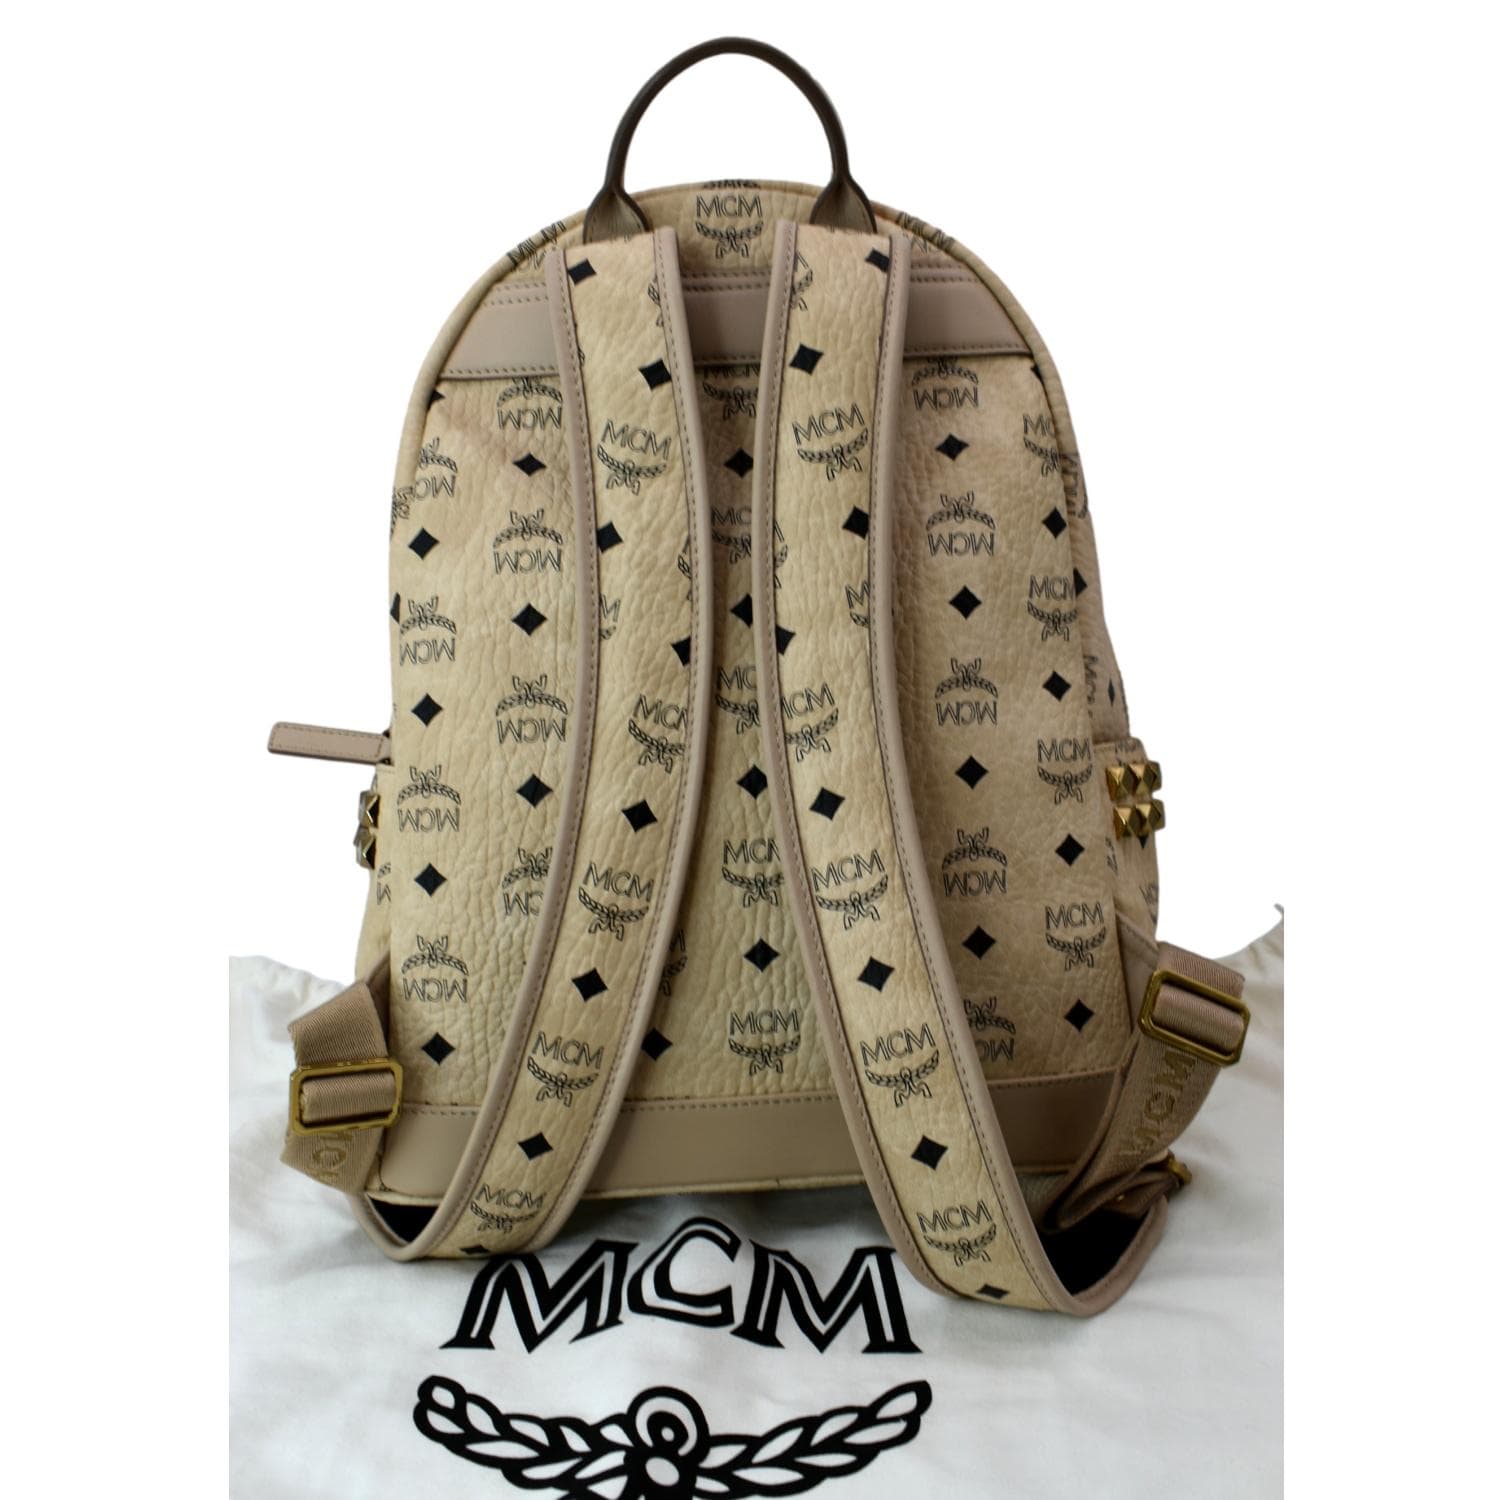 AUTHENTIC MCM SIDE STUD BACKPACK BRAND NEW!!!